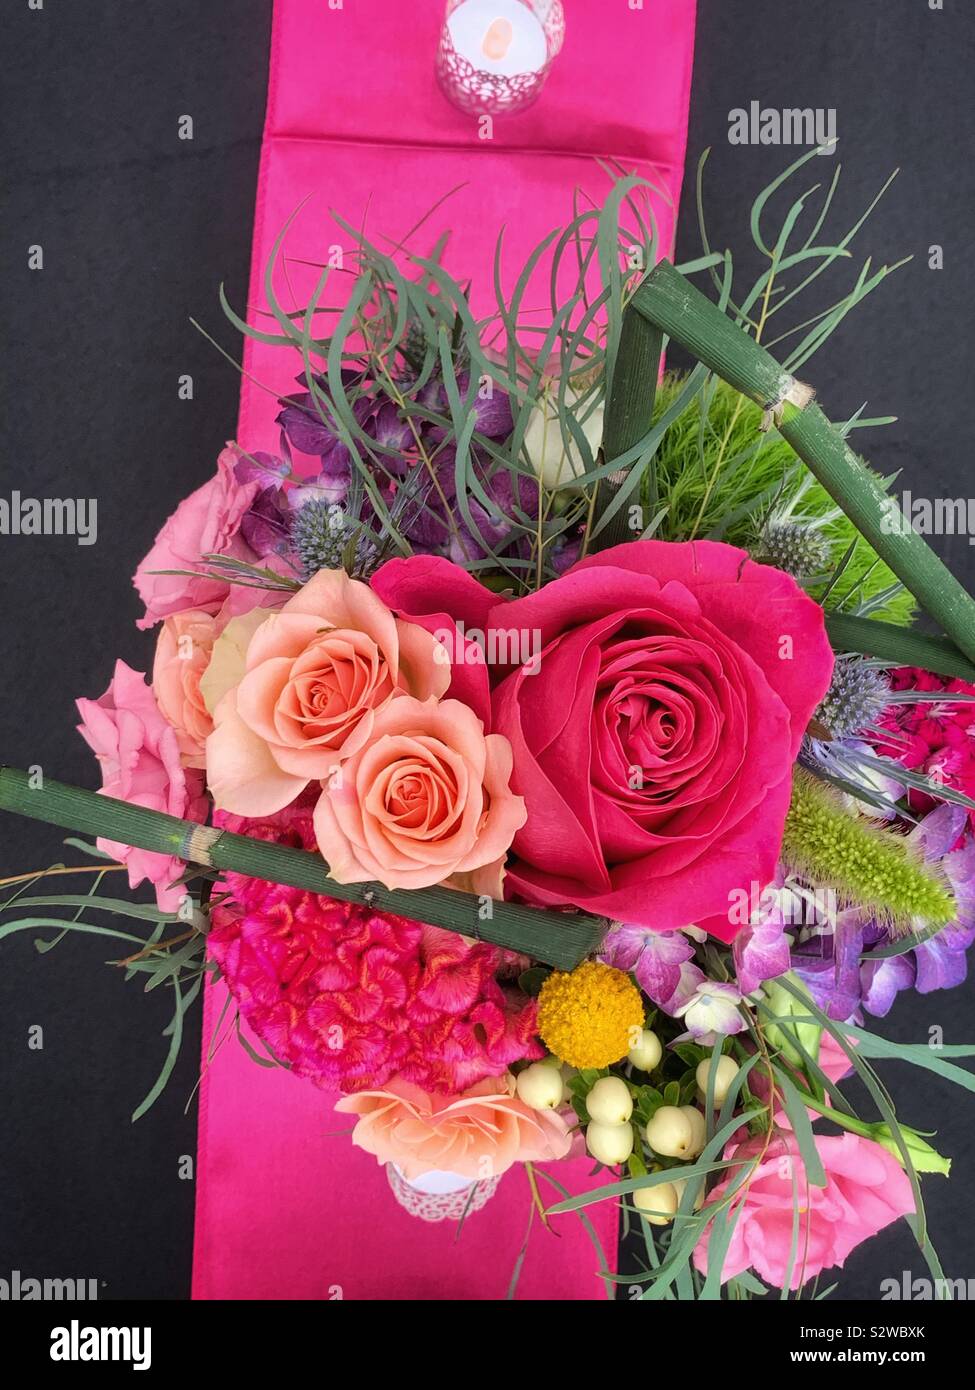 Beautiful flower arrangement with deep pink roses in full bloom on a black tablecloth. Stock Photo